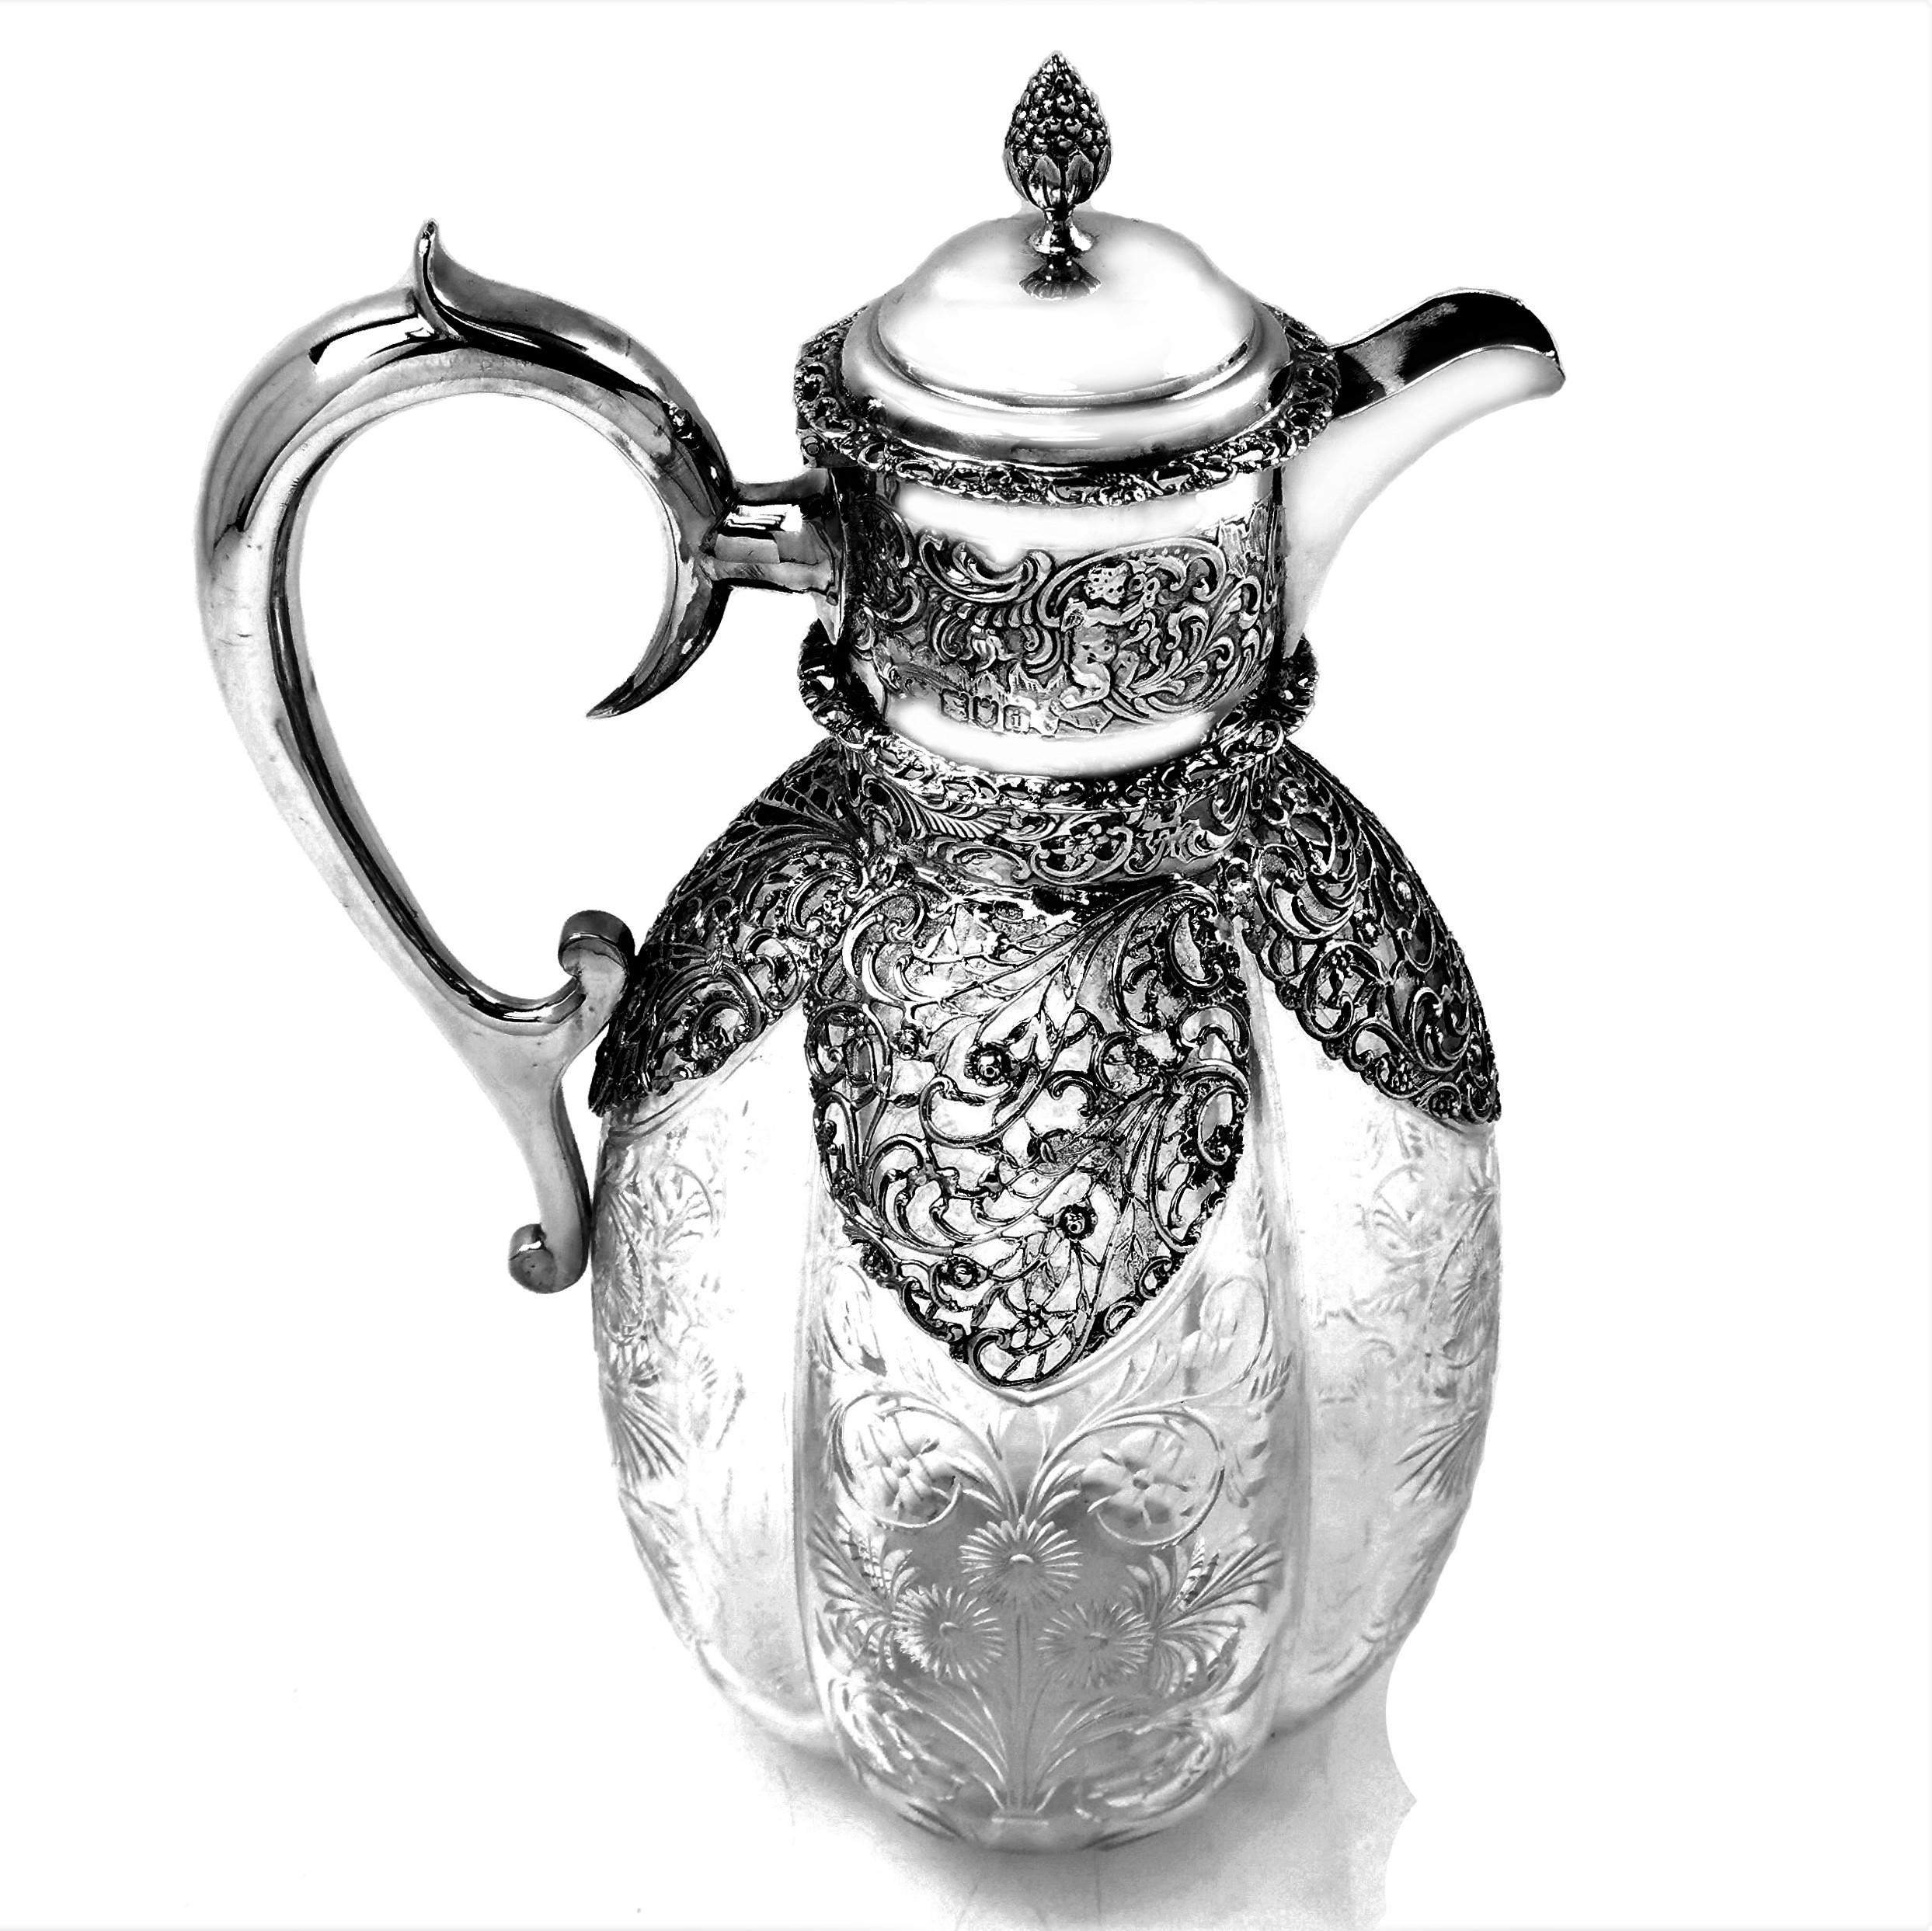 A beautiful Antique Edwardian solid Silver mounted Claret Jug with a cut glass body. The body of the Jug features an elegant quatrefoil shape with each lobe embellished with a delicate floral cut patterns. The Jug has a chased silver neck, lid and